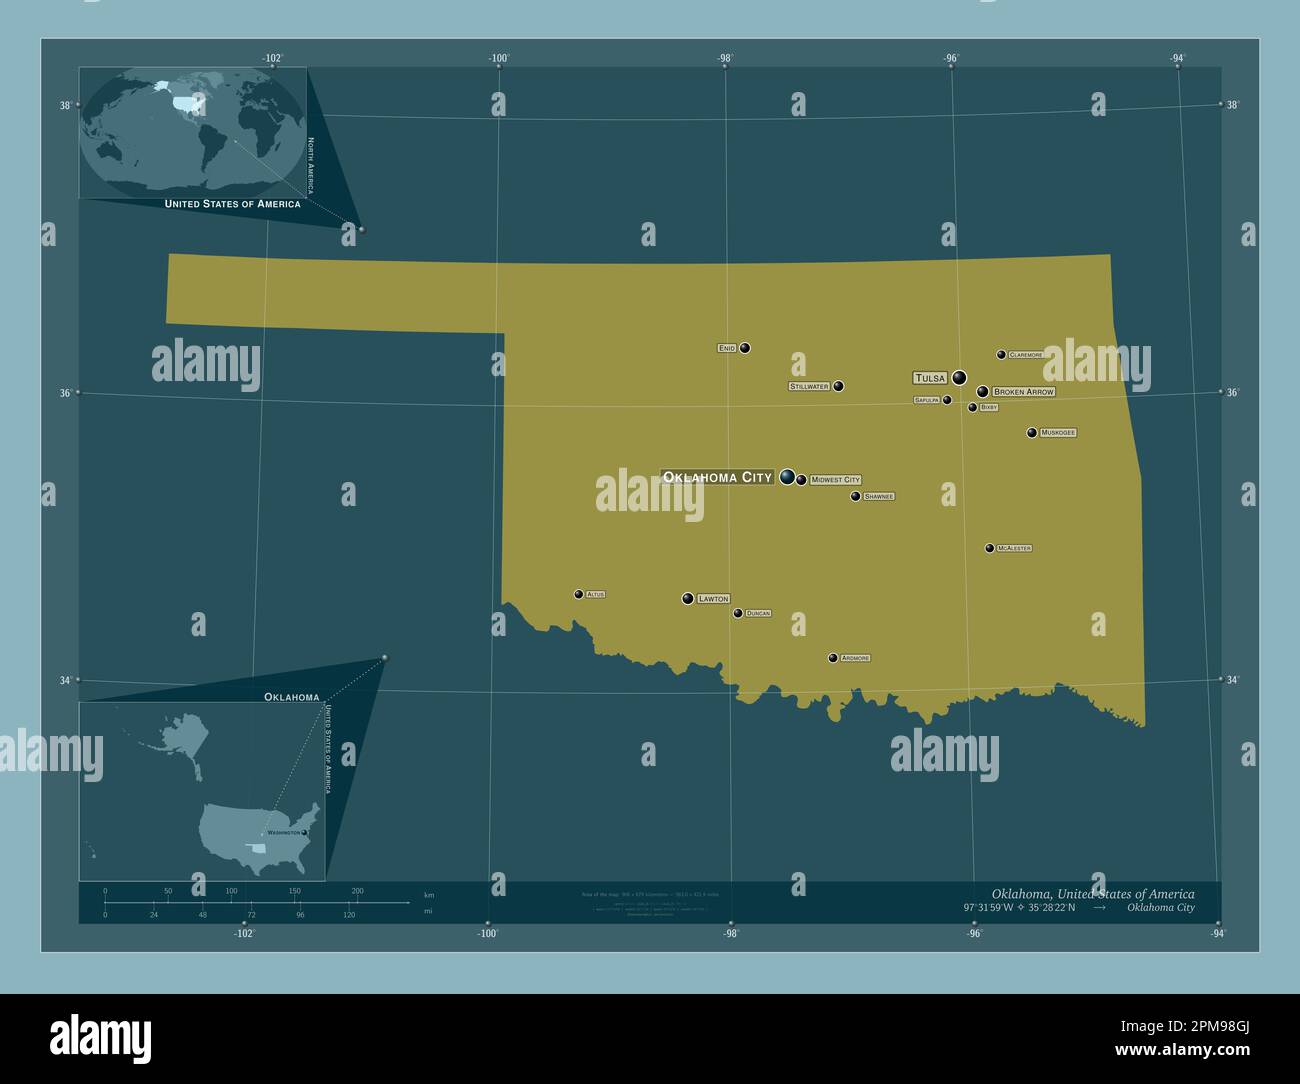 Oklahoma, state of United States of America. Solid color shape. Locations and names of major cities of the region. Corner auxiliary location maps Stock Photo